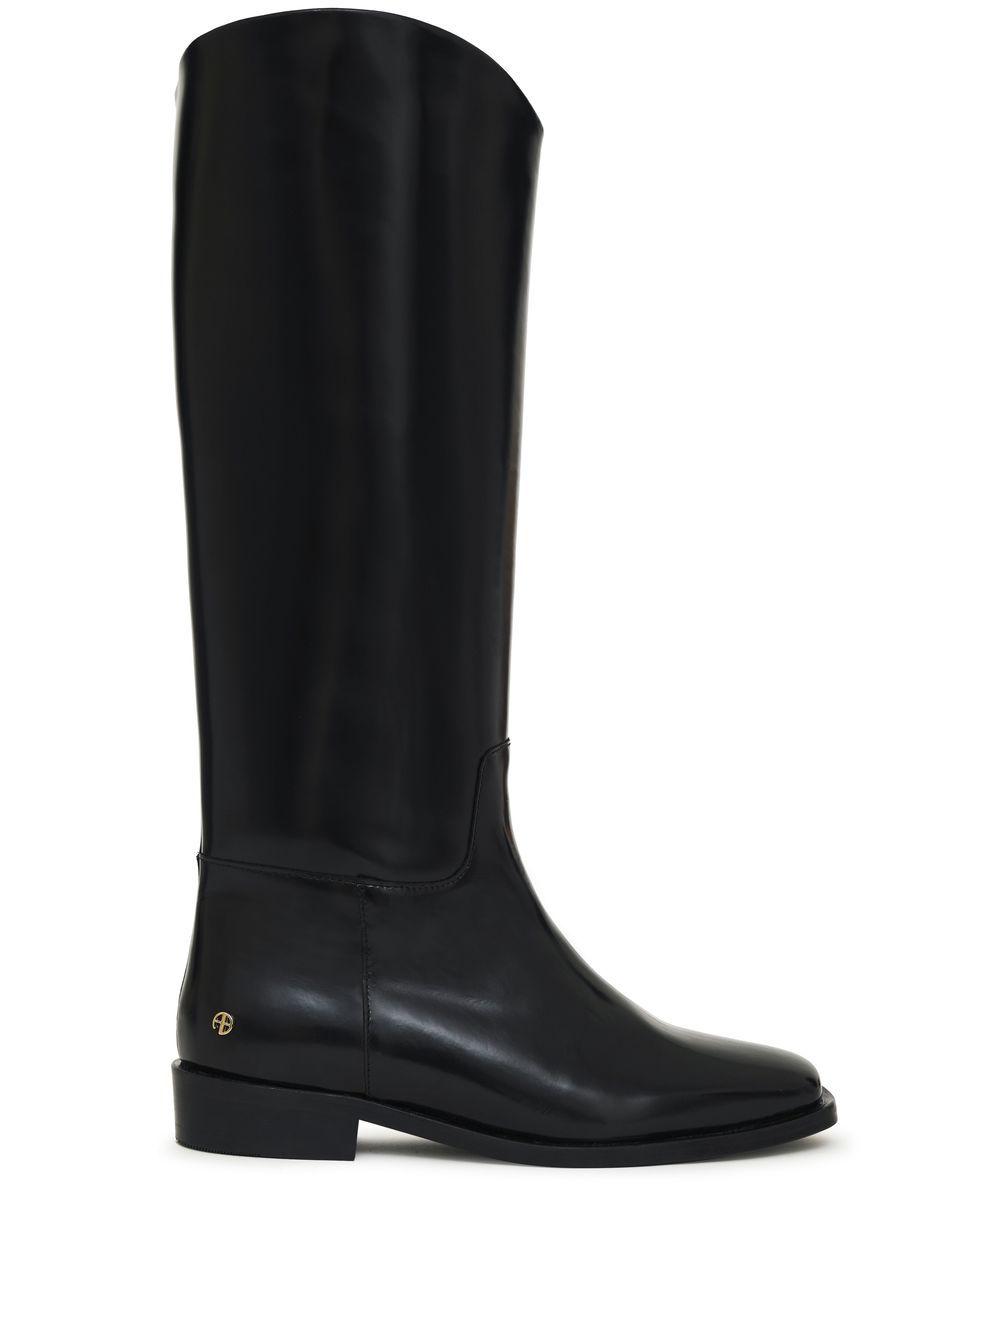 Anine Bing Kari Leather Riding Boots in Black | Lyst